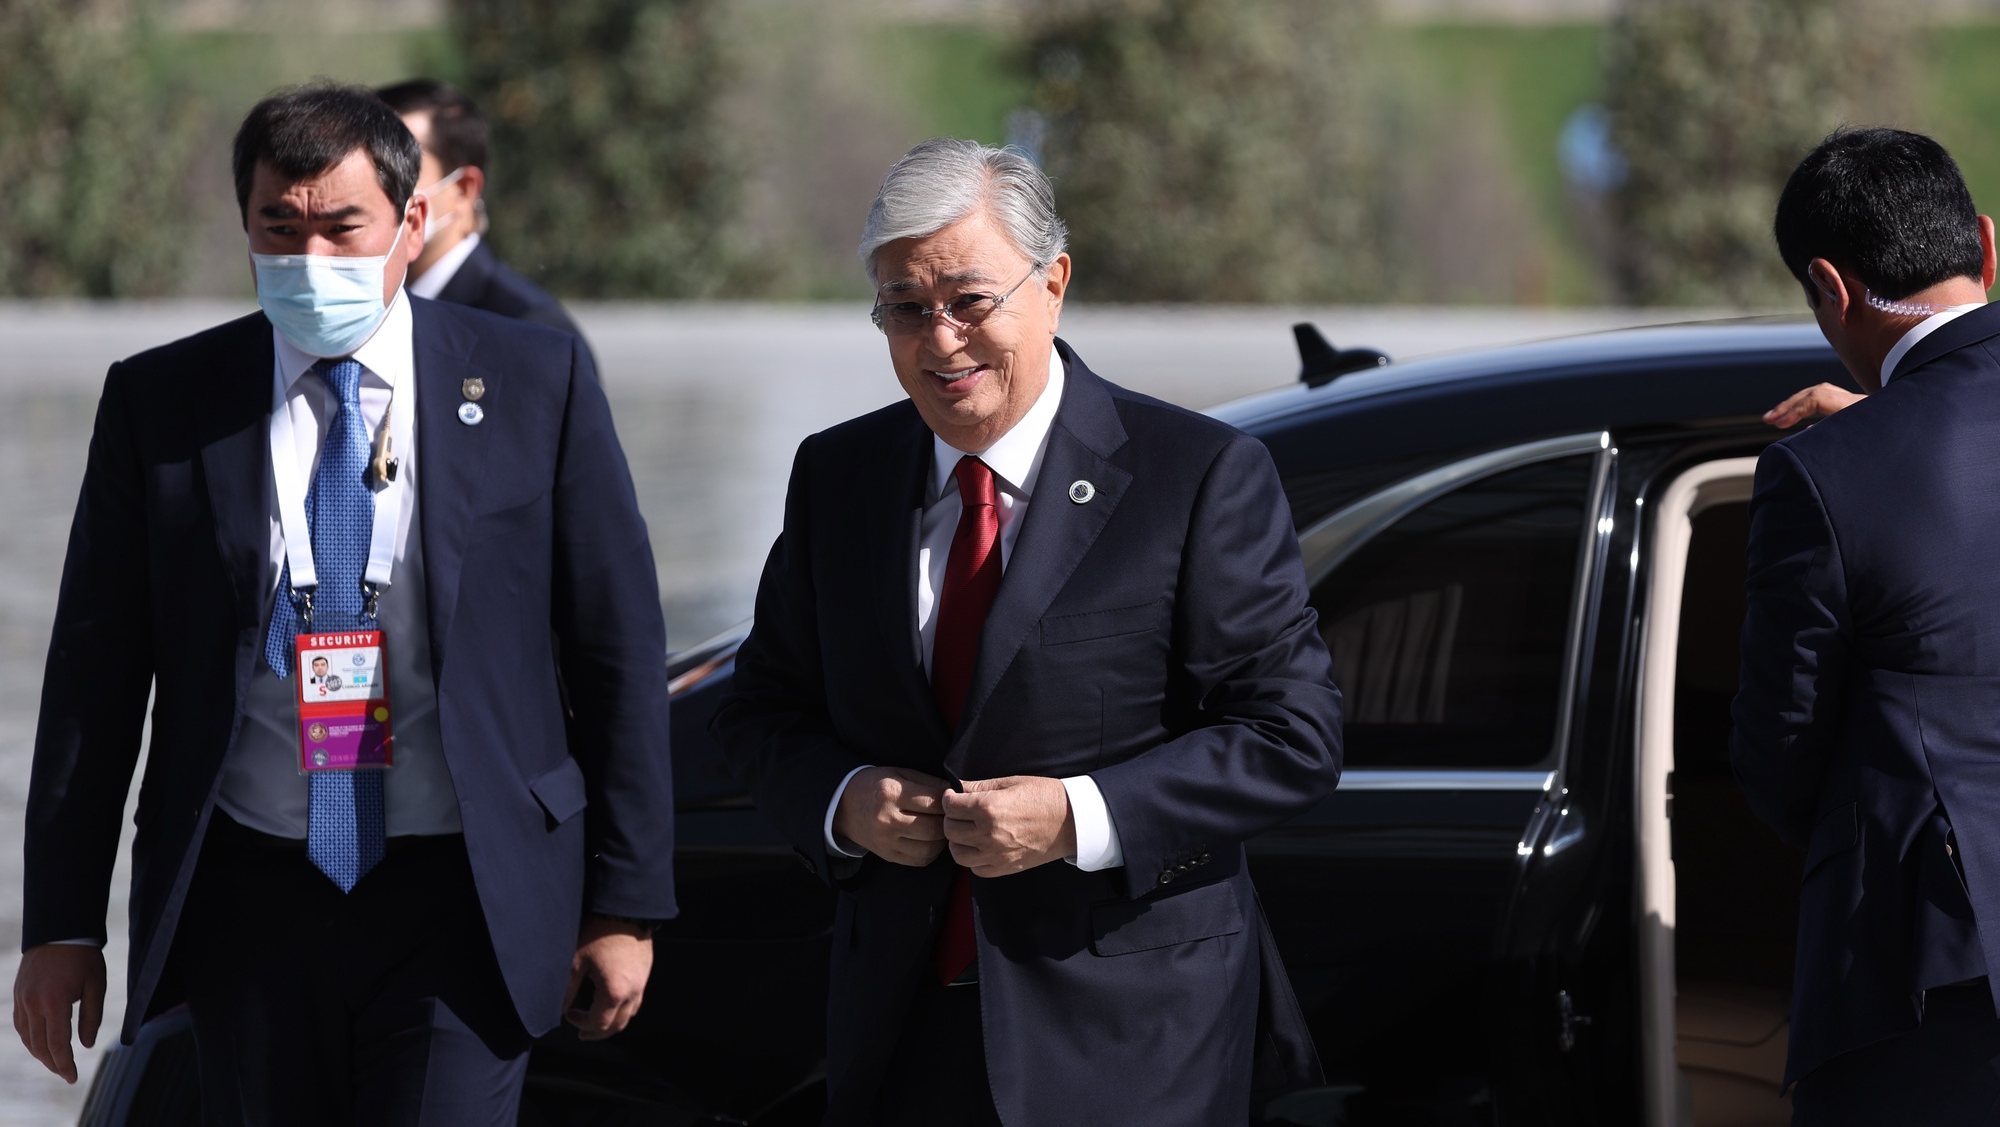 epa10187408 Kazakh President Kassym-Jomart Tokayev (C) arrives for the 22nd Shanghai Cooperation Organisation Heads of State Council (SCO-HSC) Summit, in Samarkand, Uzbekistan, 16 September 2022. The SCO is an international alliance founded in 2001 in Shanghai and composed of China, India, Kazakhstan, Kyrgyzstan, Russia, Pakistan, Tajikistan, Uzbekistan and four Observer States interested in acceding to full membership - Afghanistan, Belarus, Iran, and Mongolia.  EPA/SERGEI BOBYLEV/SPUTNIK/KREMLIN POOL MANDATORY CREDIT